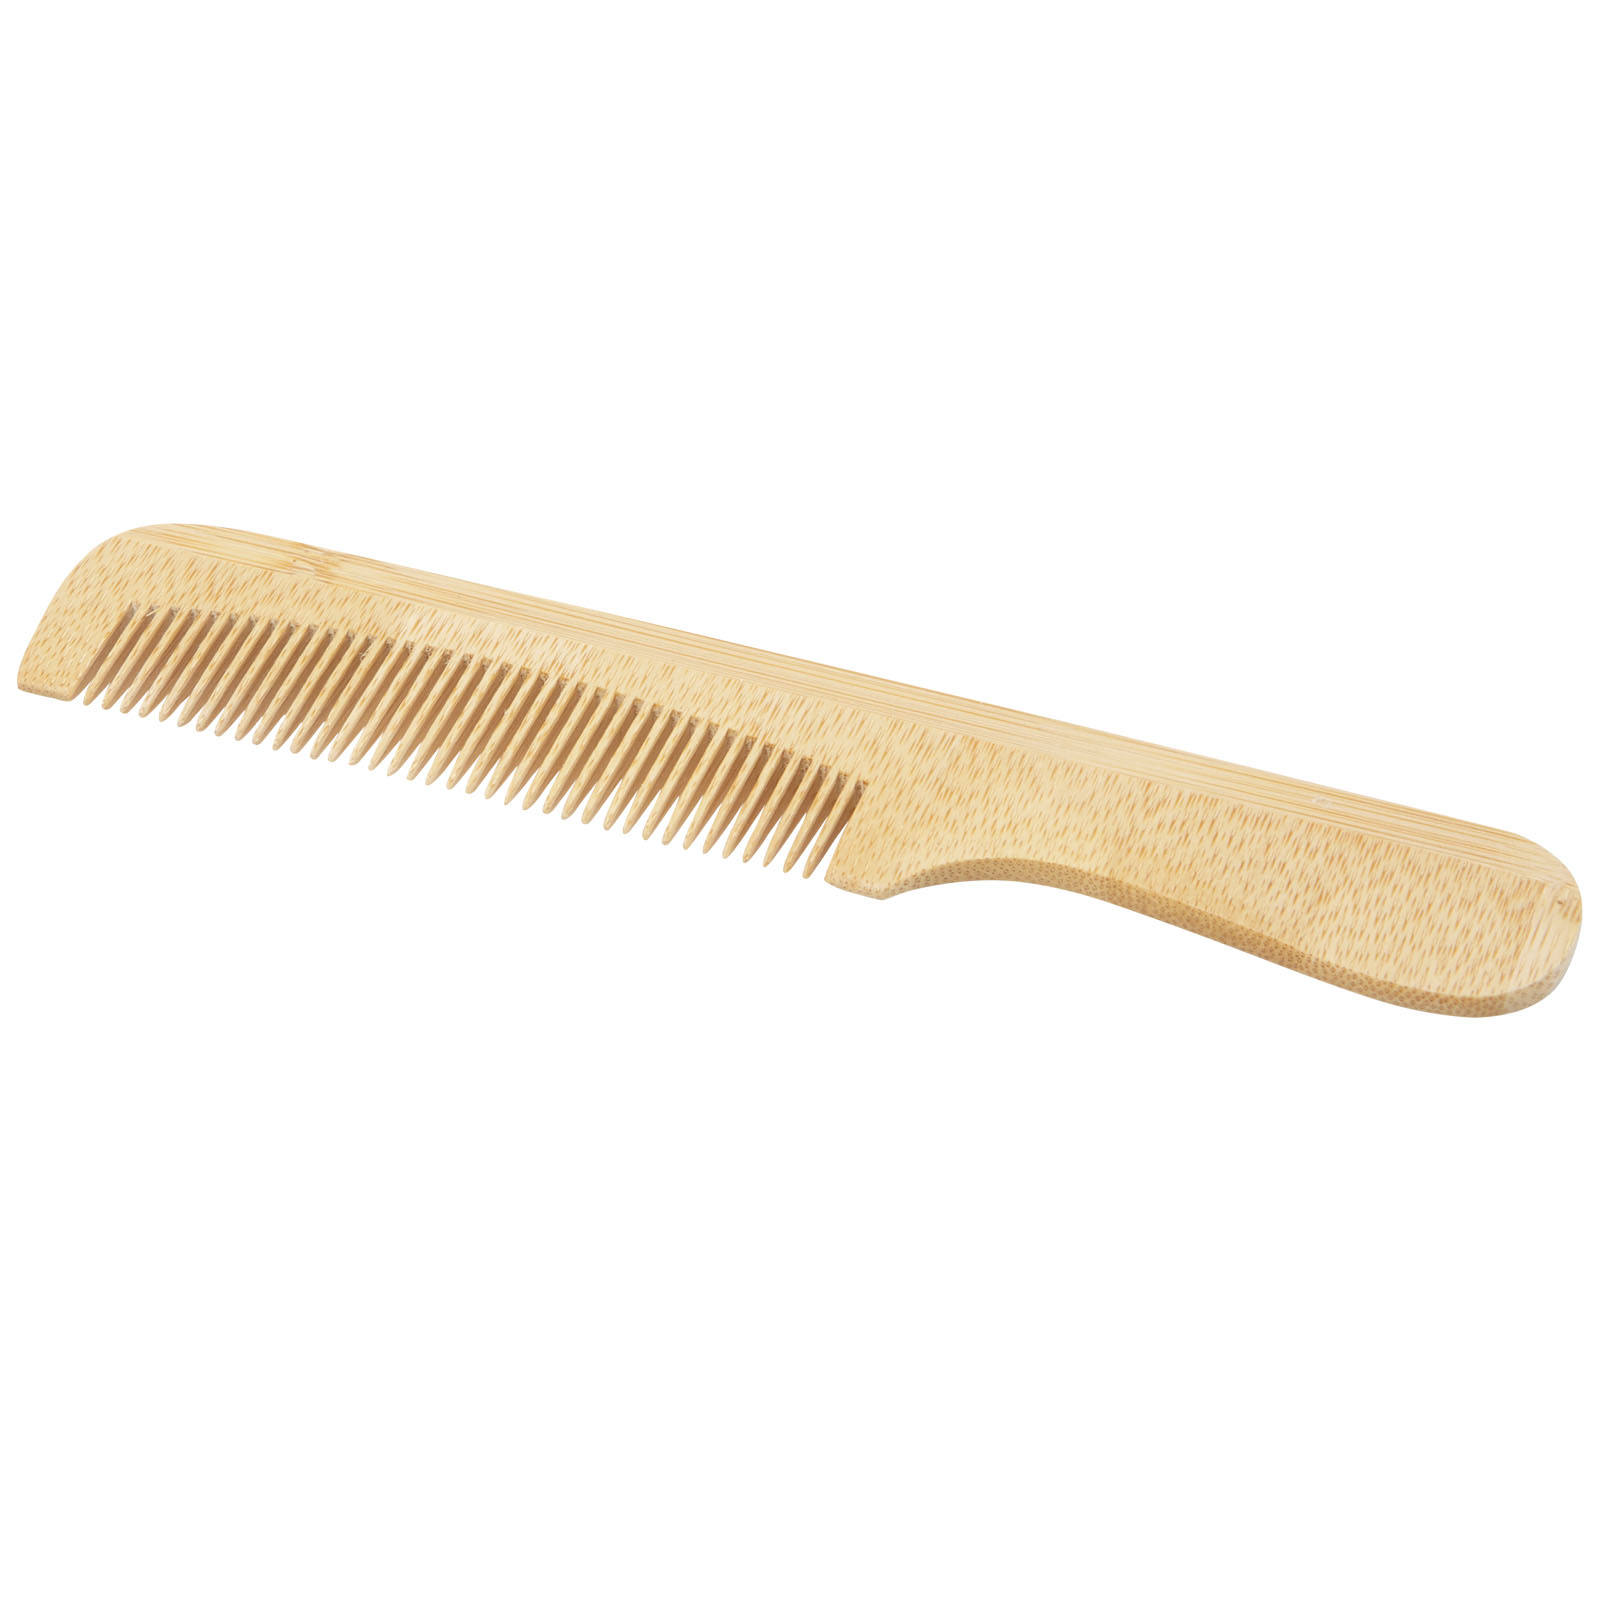 Health & Personal Care - Heby bamboo comb with handle